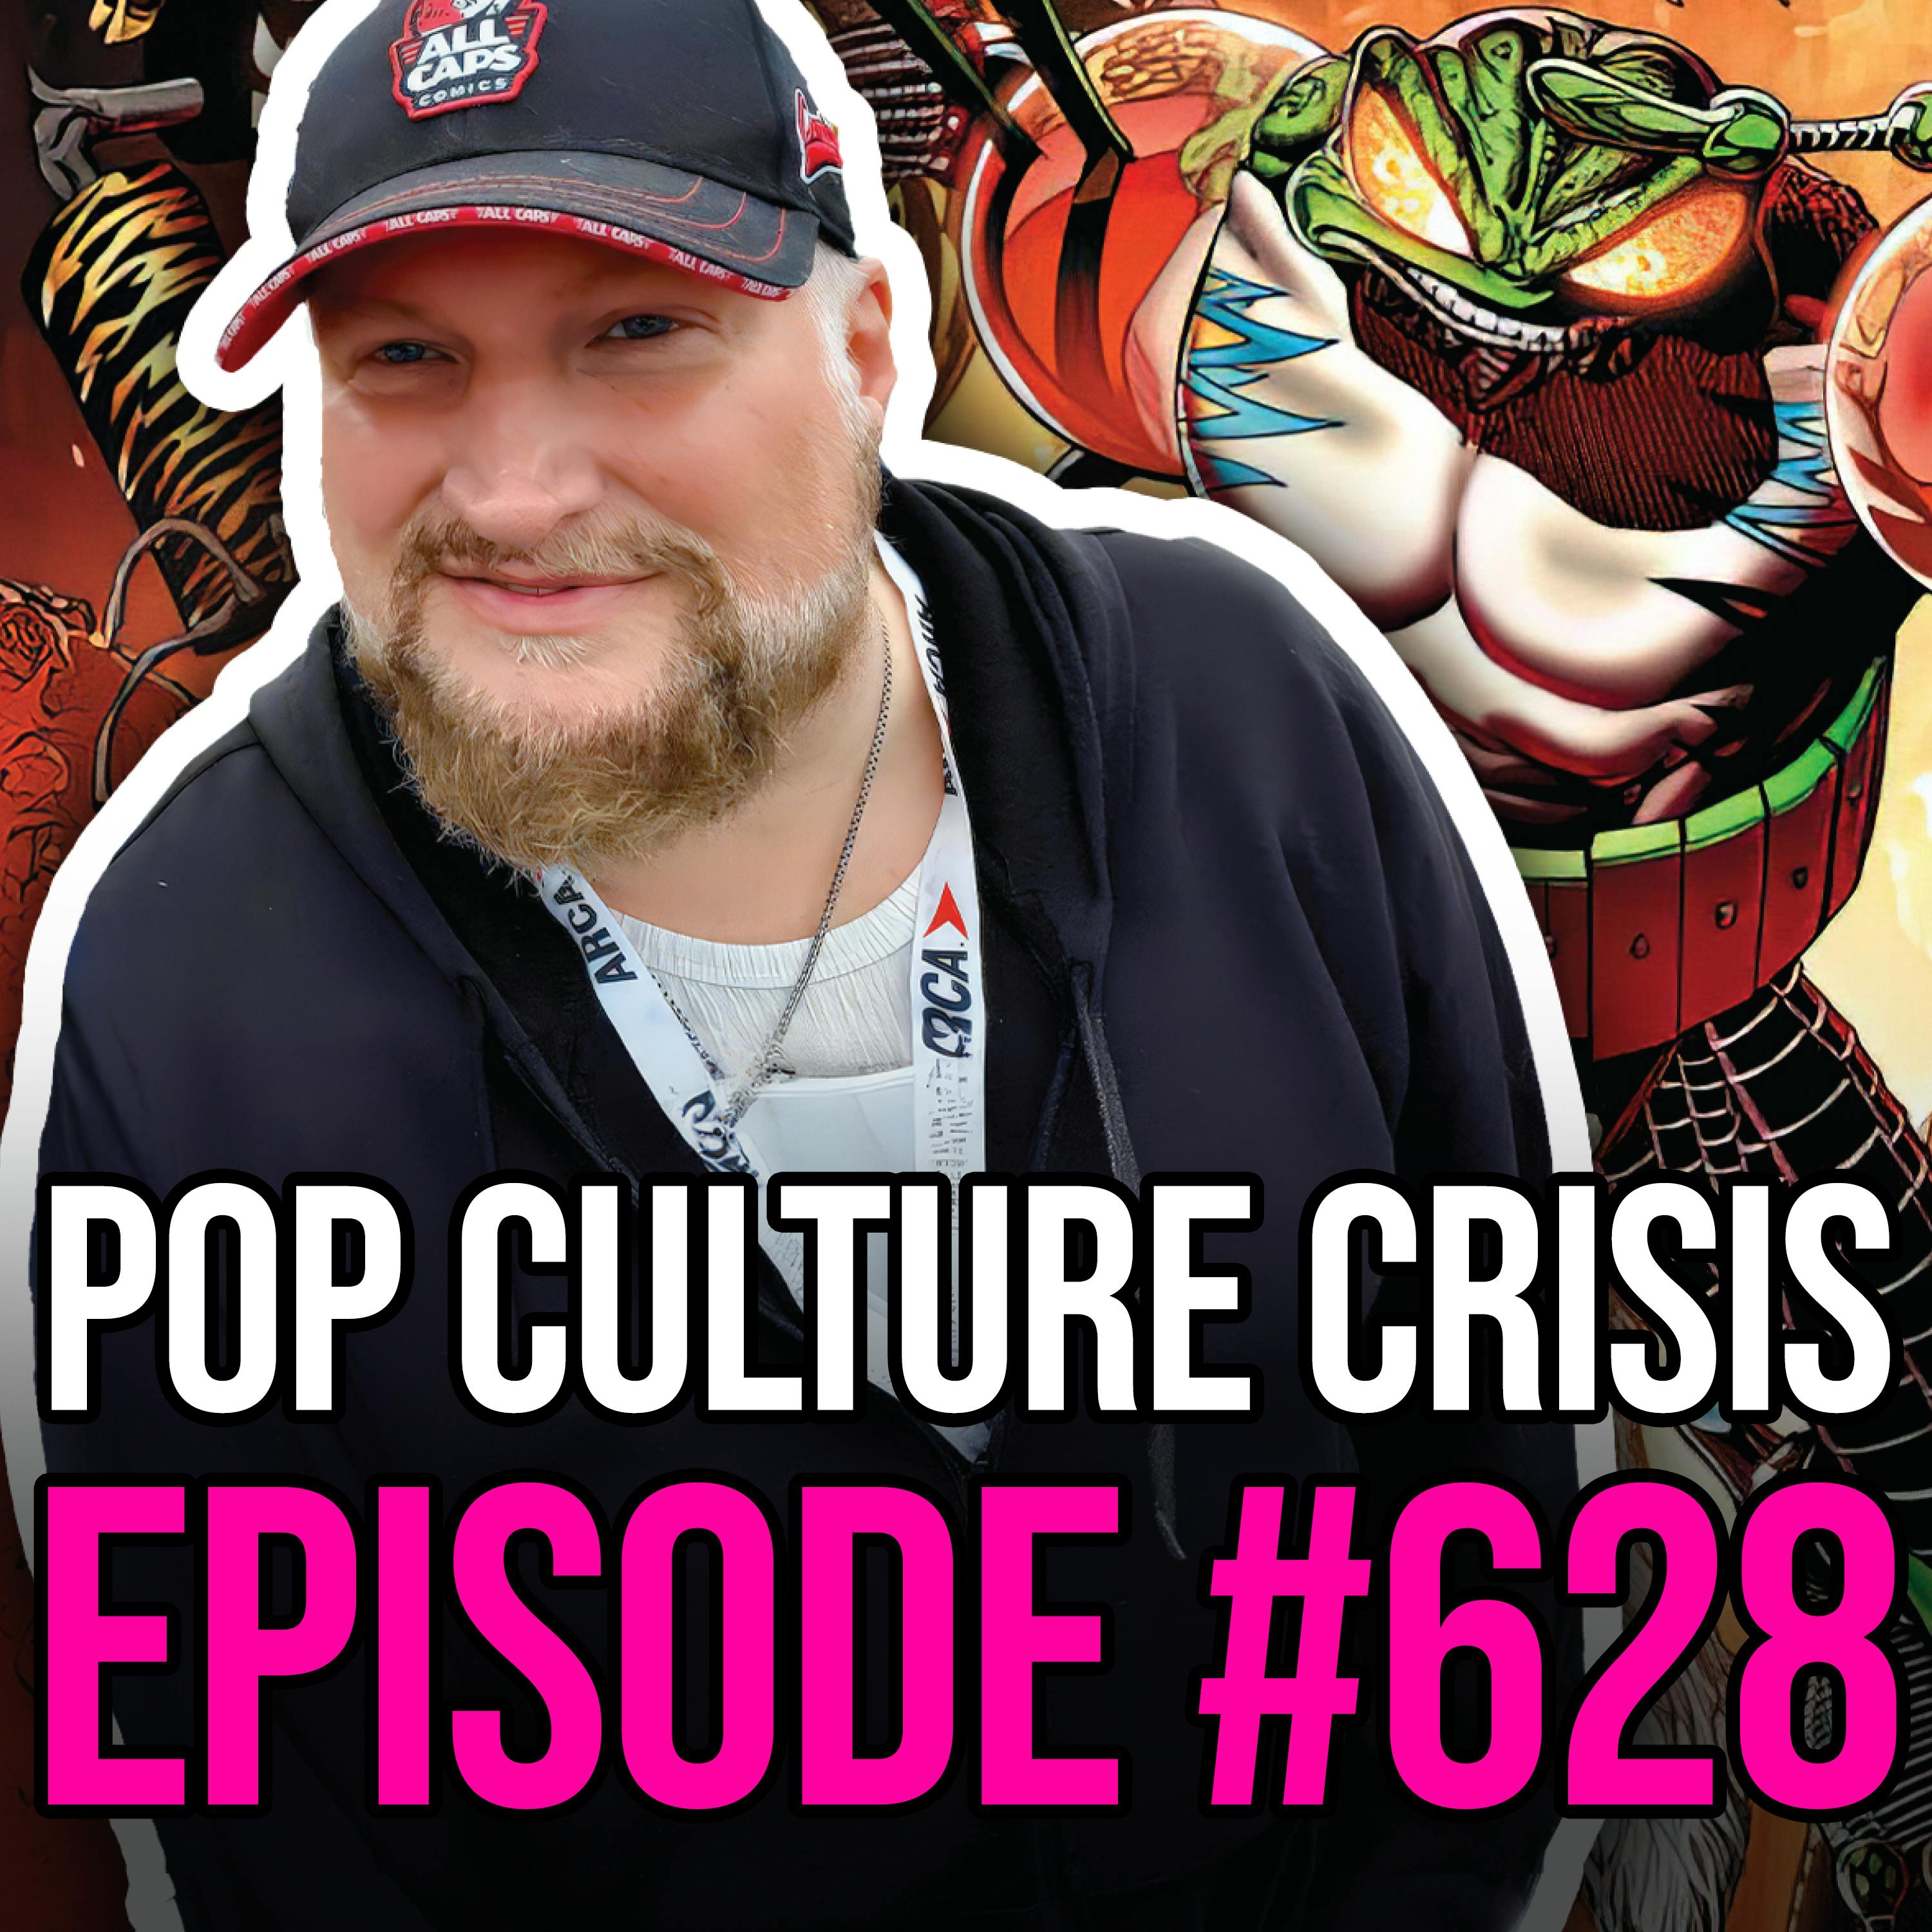 EPISODE 628: Is Star Wars DEAD?, Movie Theaters Collapse, New 'Avengers' Details (W/ Ethan Van Sciver)